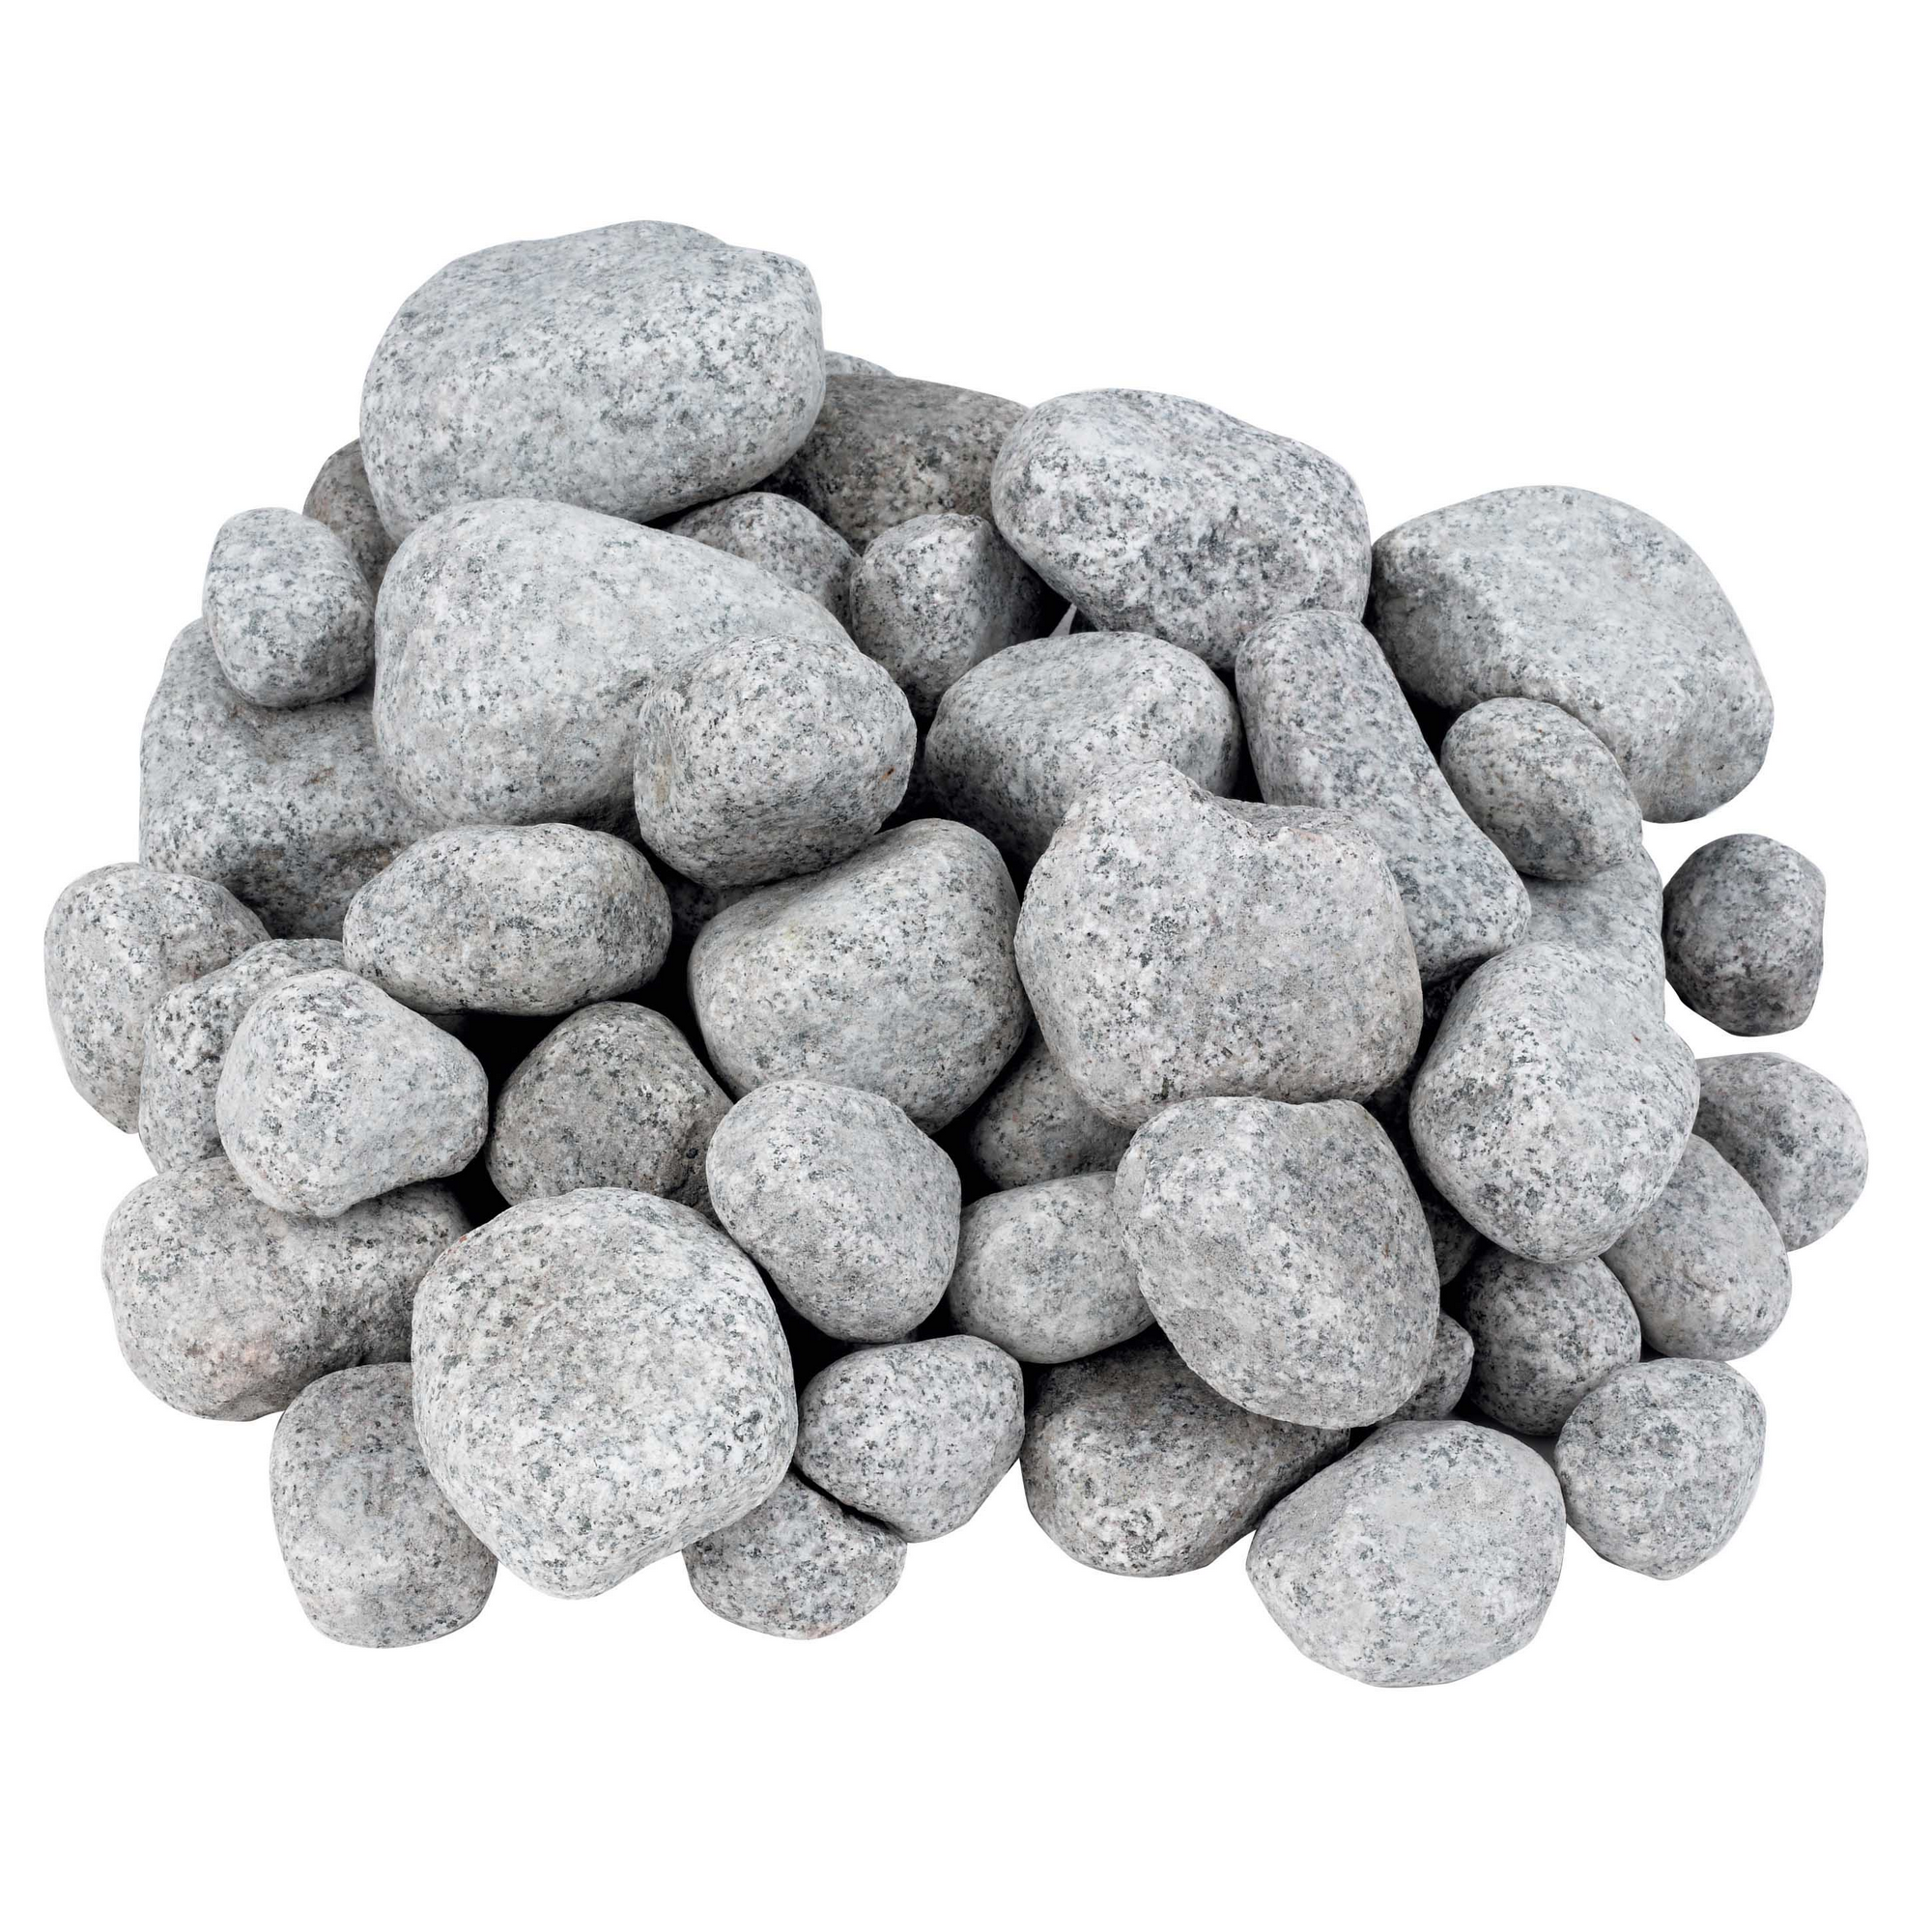 Granitkies grau 20/40 mm 250 kg + product picture